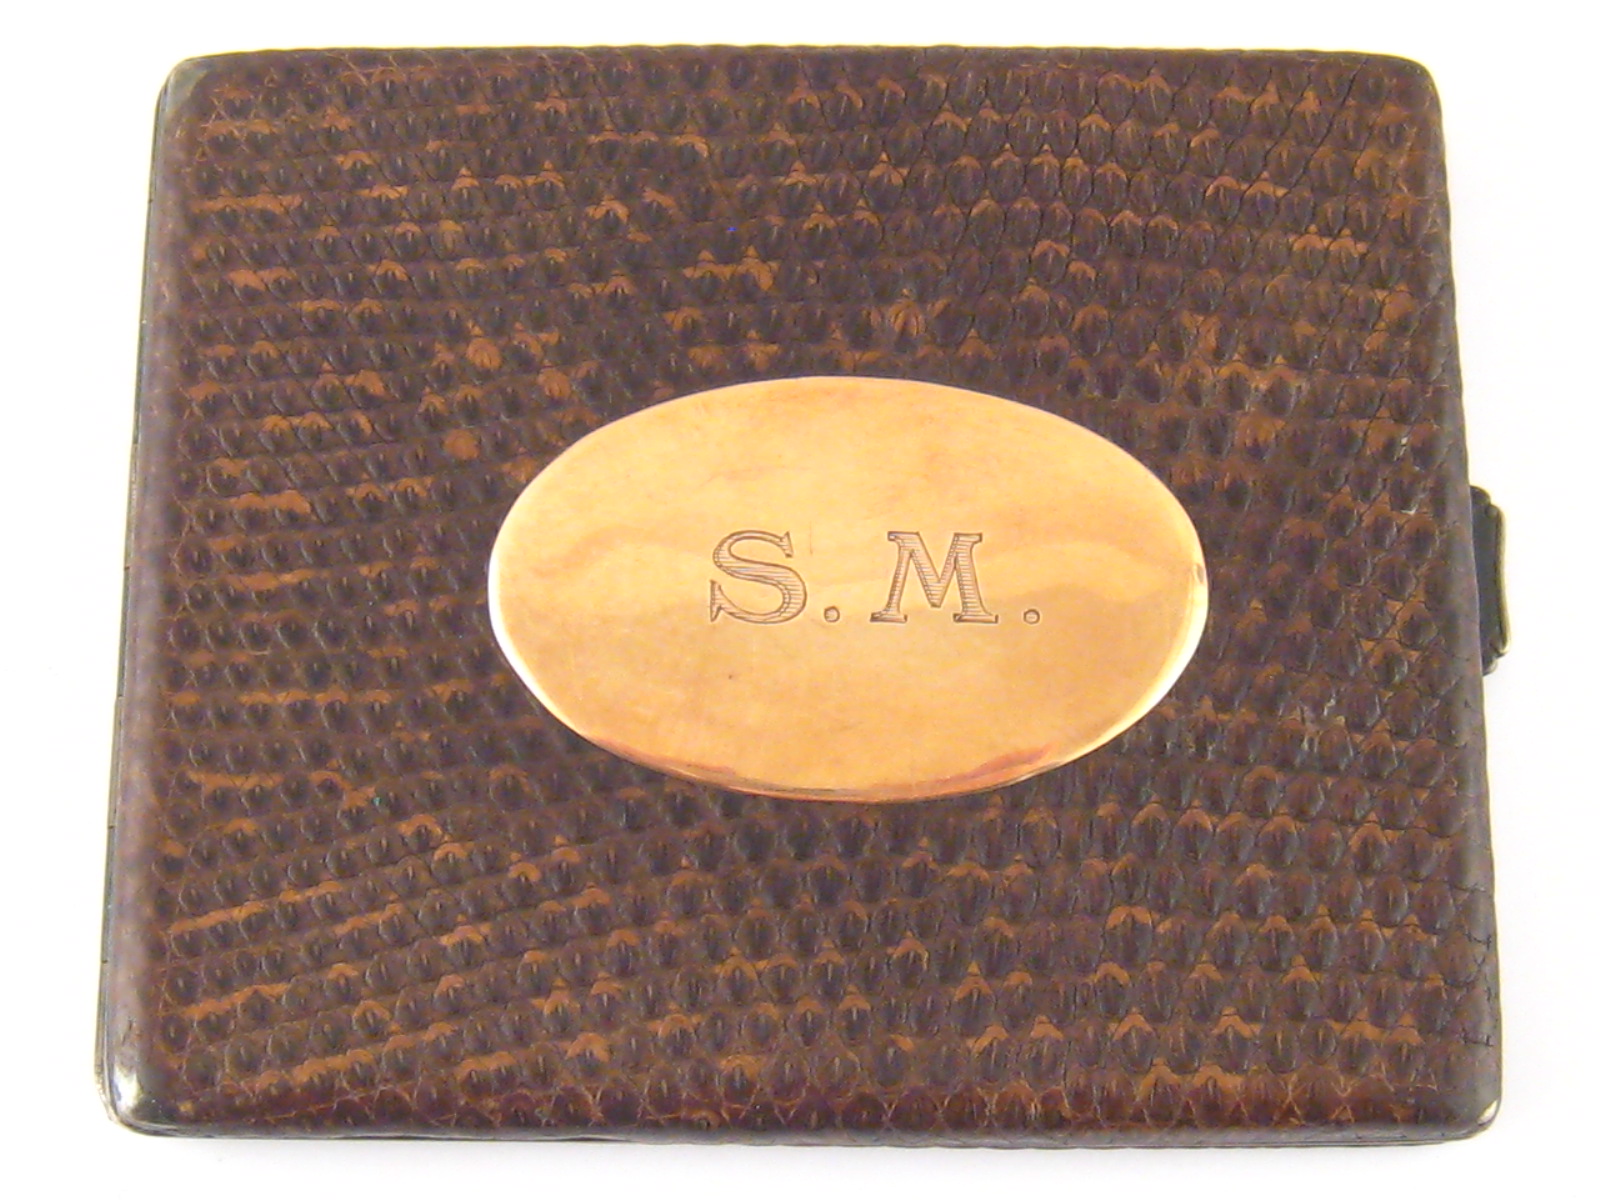 A snake skin covered German hallmarked 925 standard silver cigarette case with a yellow metal (tests